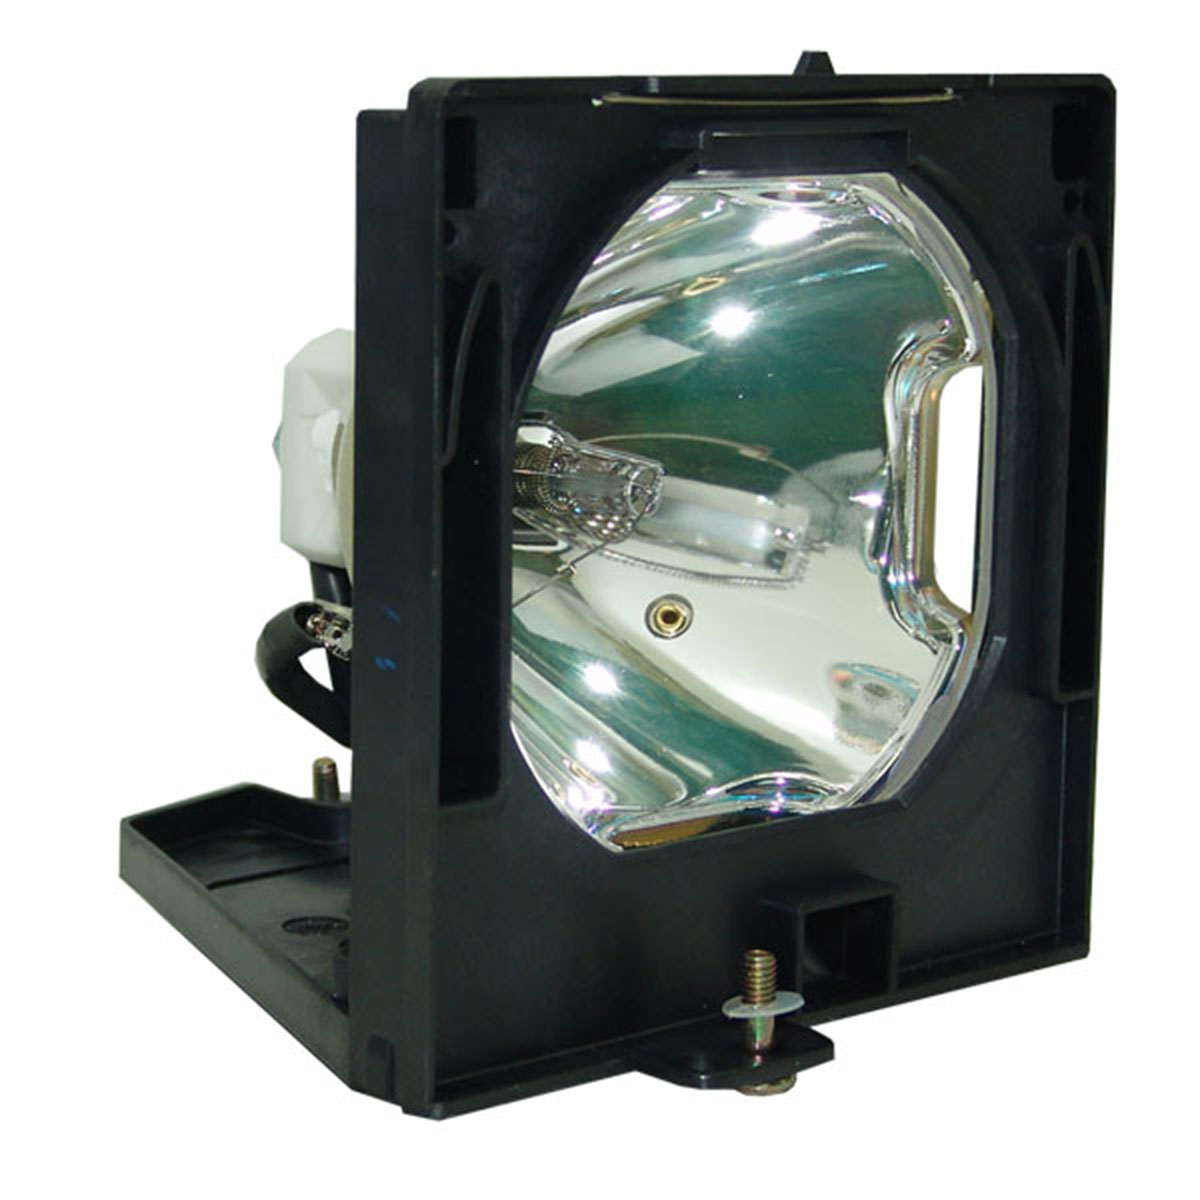 Buyquest PLC-XP35  OEM Replacement Projector Lamp for Sanyo. Includes New Ushio NSH 250W Bulb and Housing